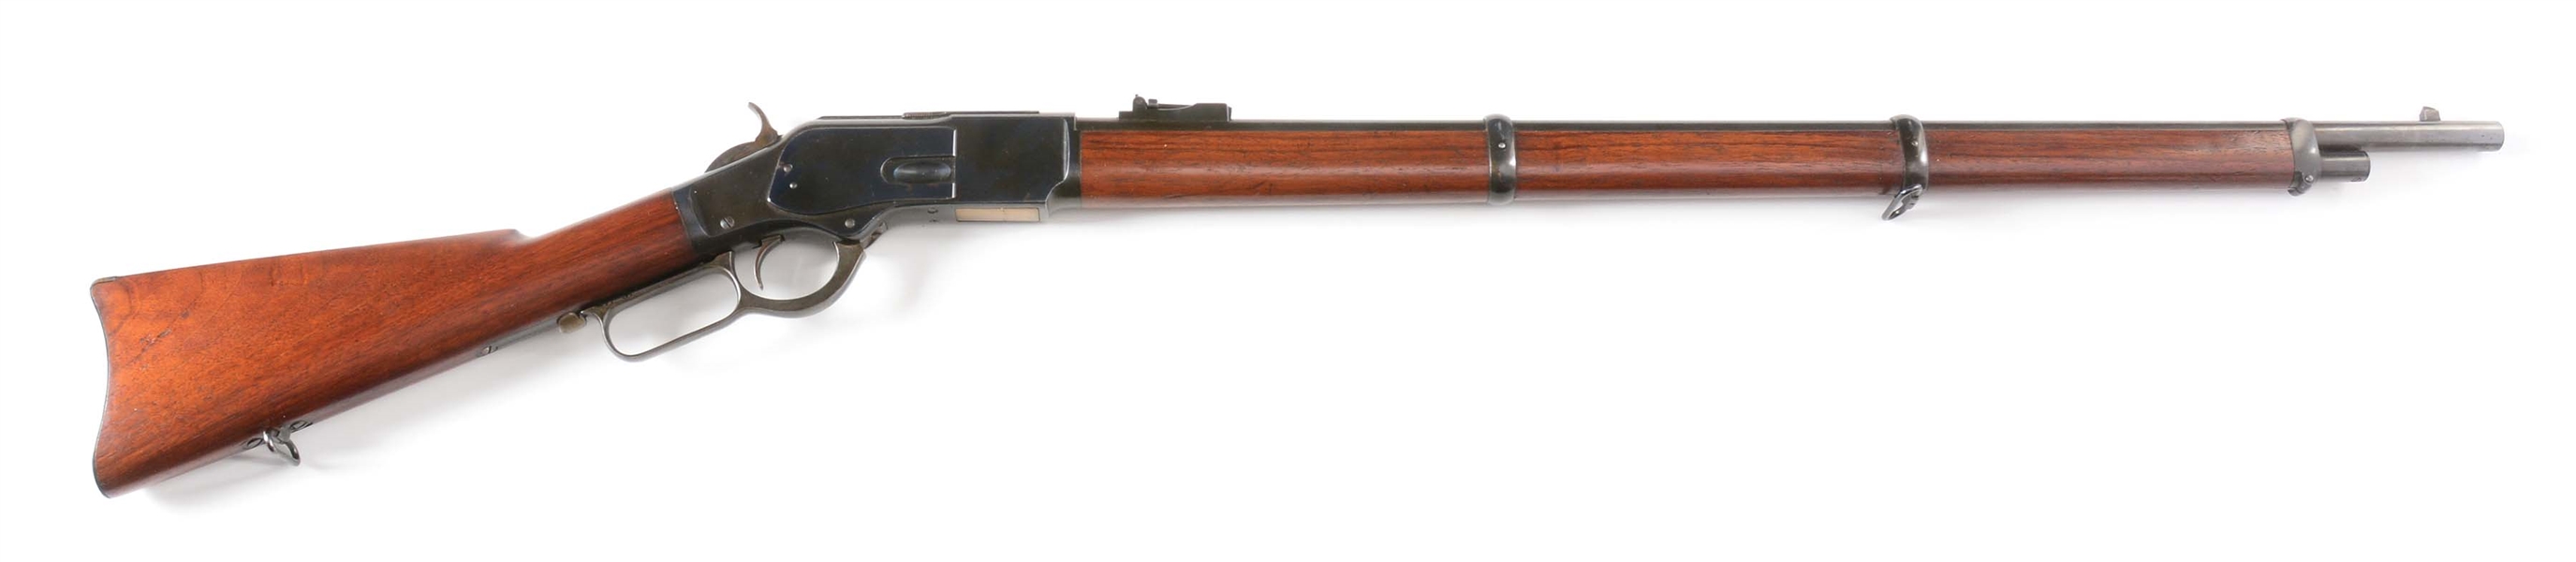 (C) WINCHESTER MODEL 1873 MUSKET WITH CLEANING ROD (1903).